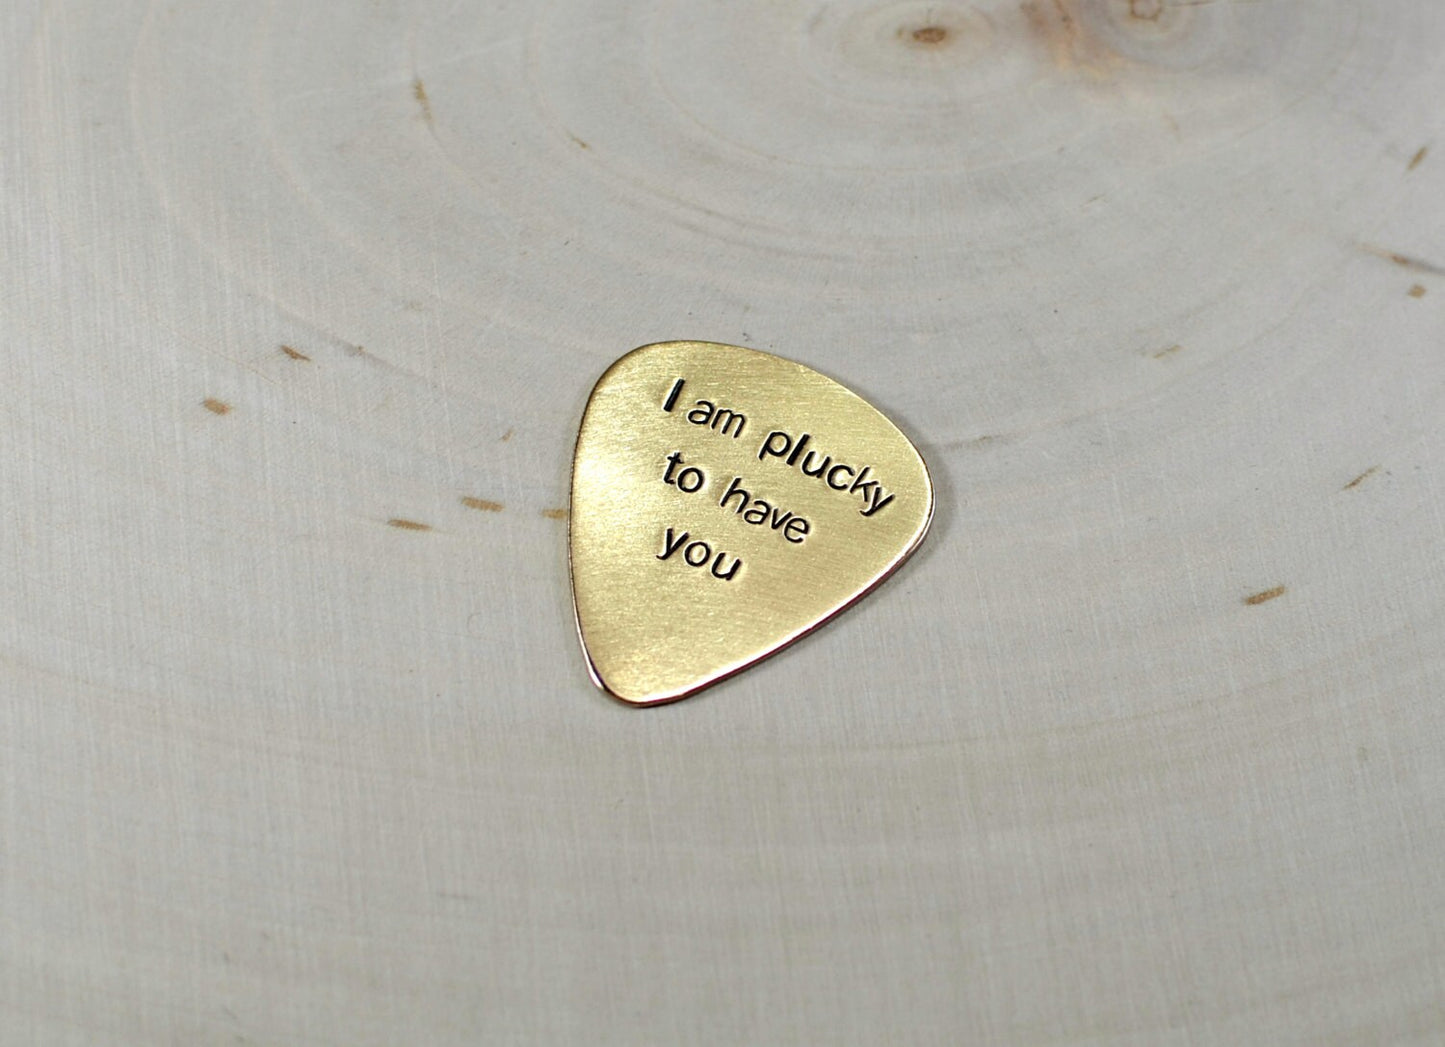 Bronze guitar pick with I am plucky to have you hand stamped and customized